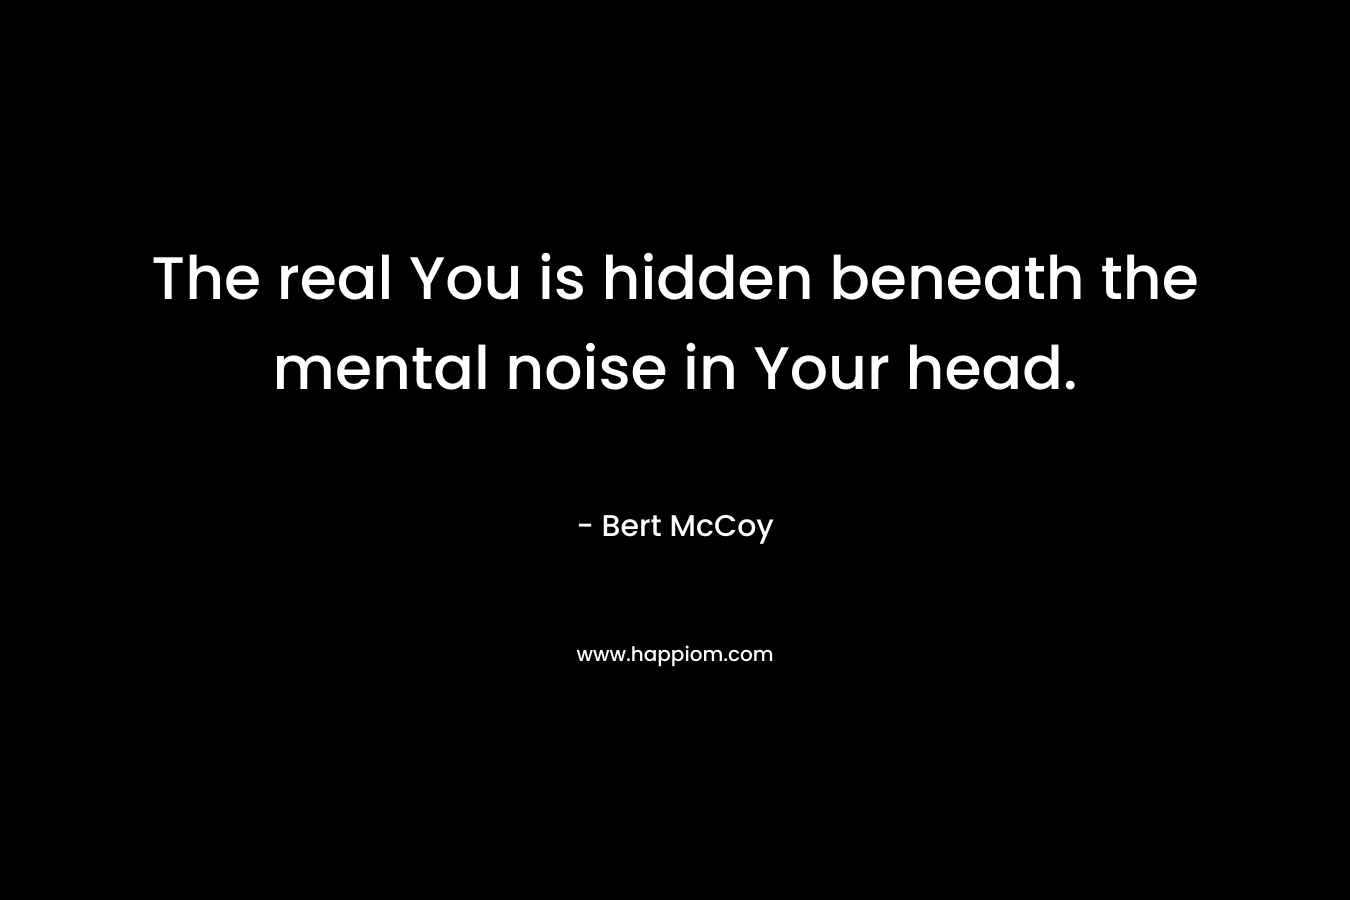 The real You is hidden beneath the mental noise in Your head.